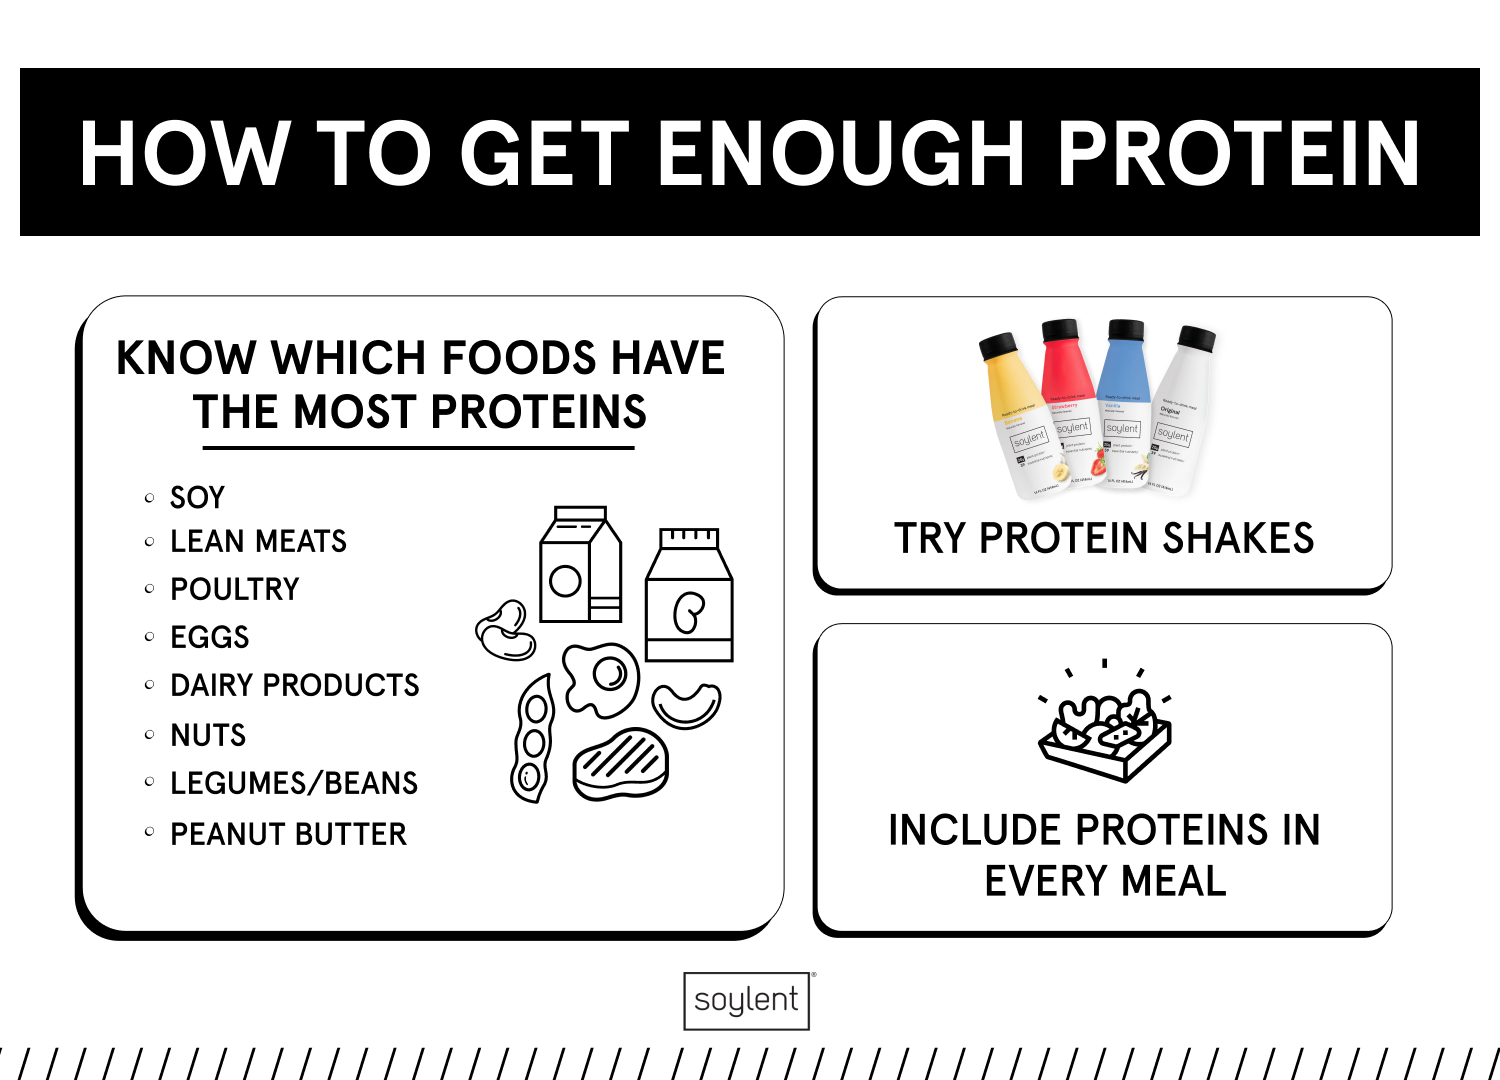 How to Get Enough Protein